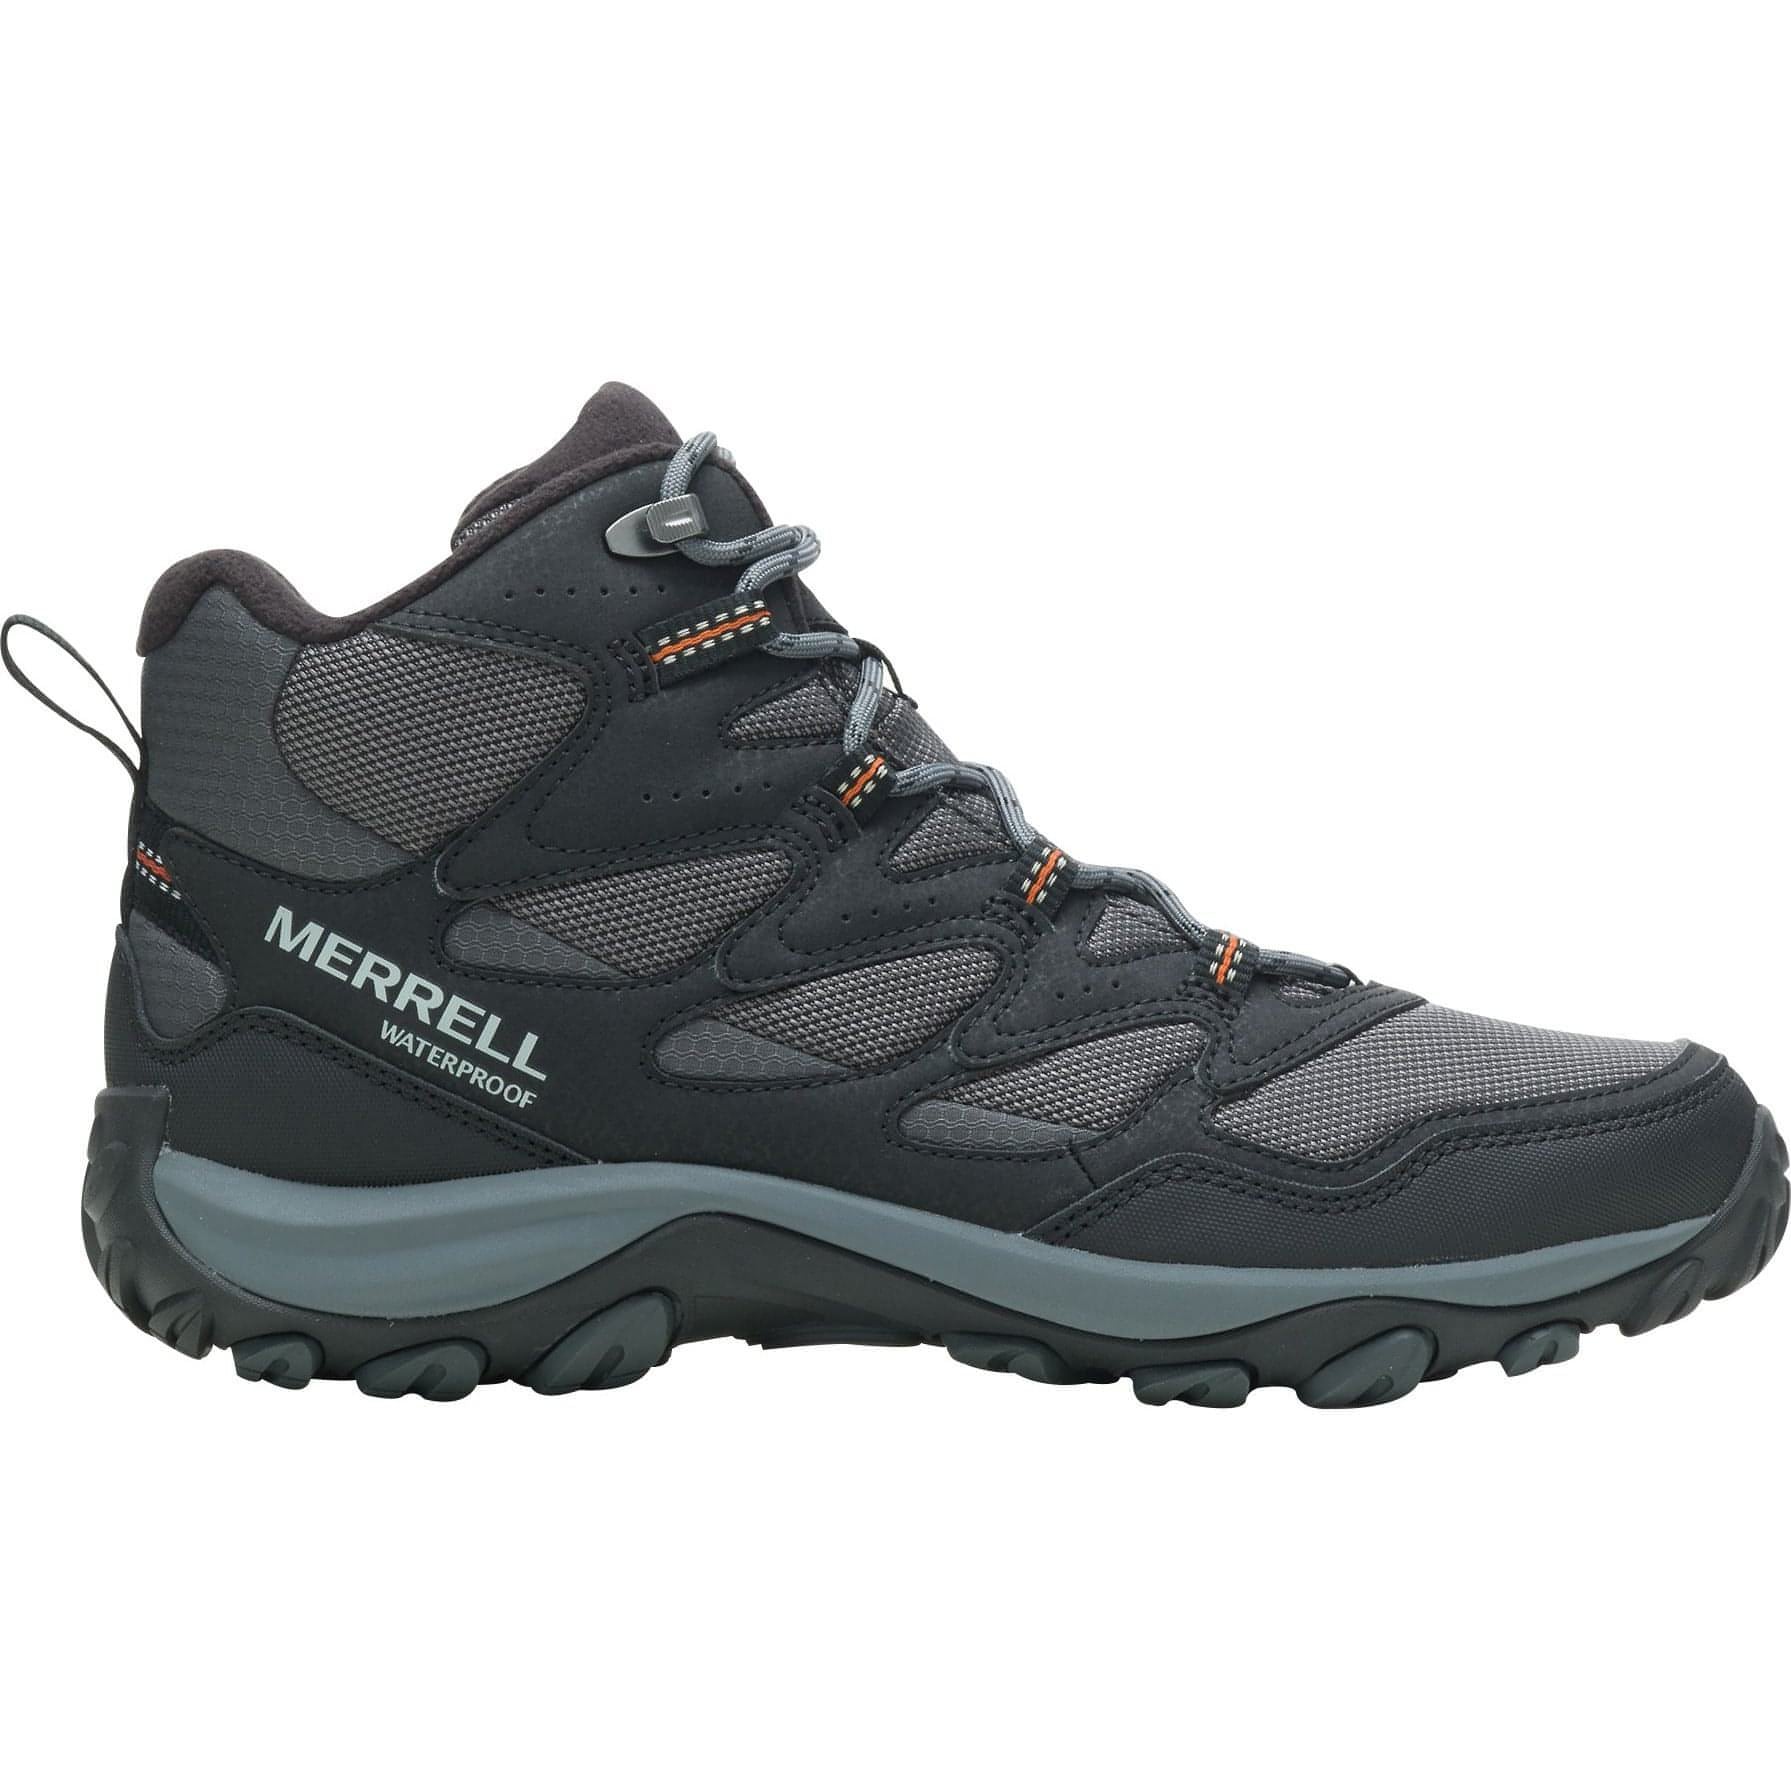 West Rim Thermo Mid Mens Boots - Blac